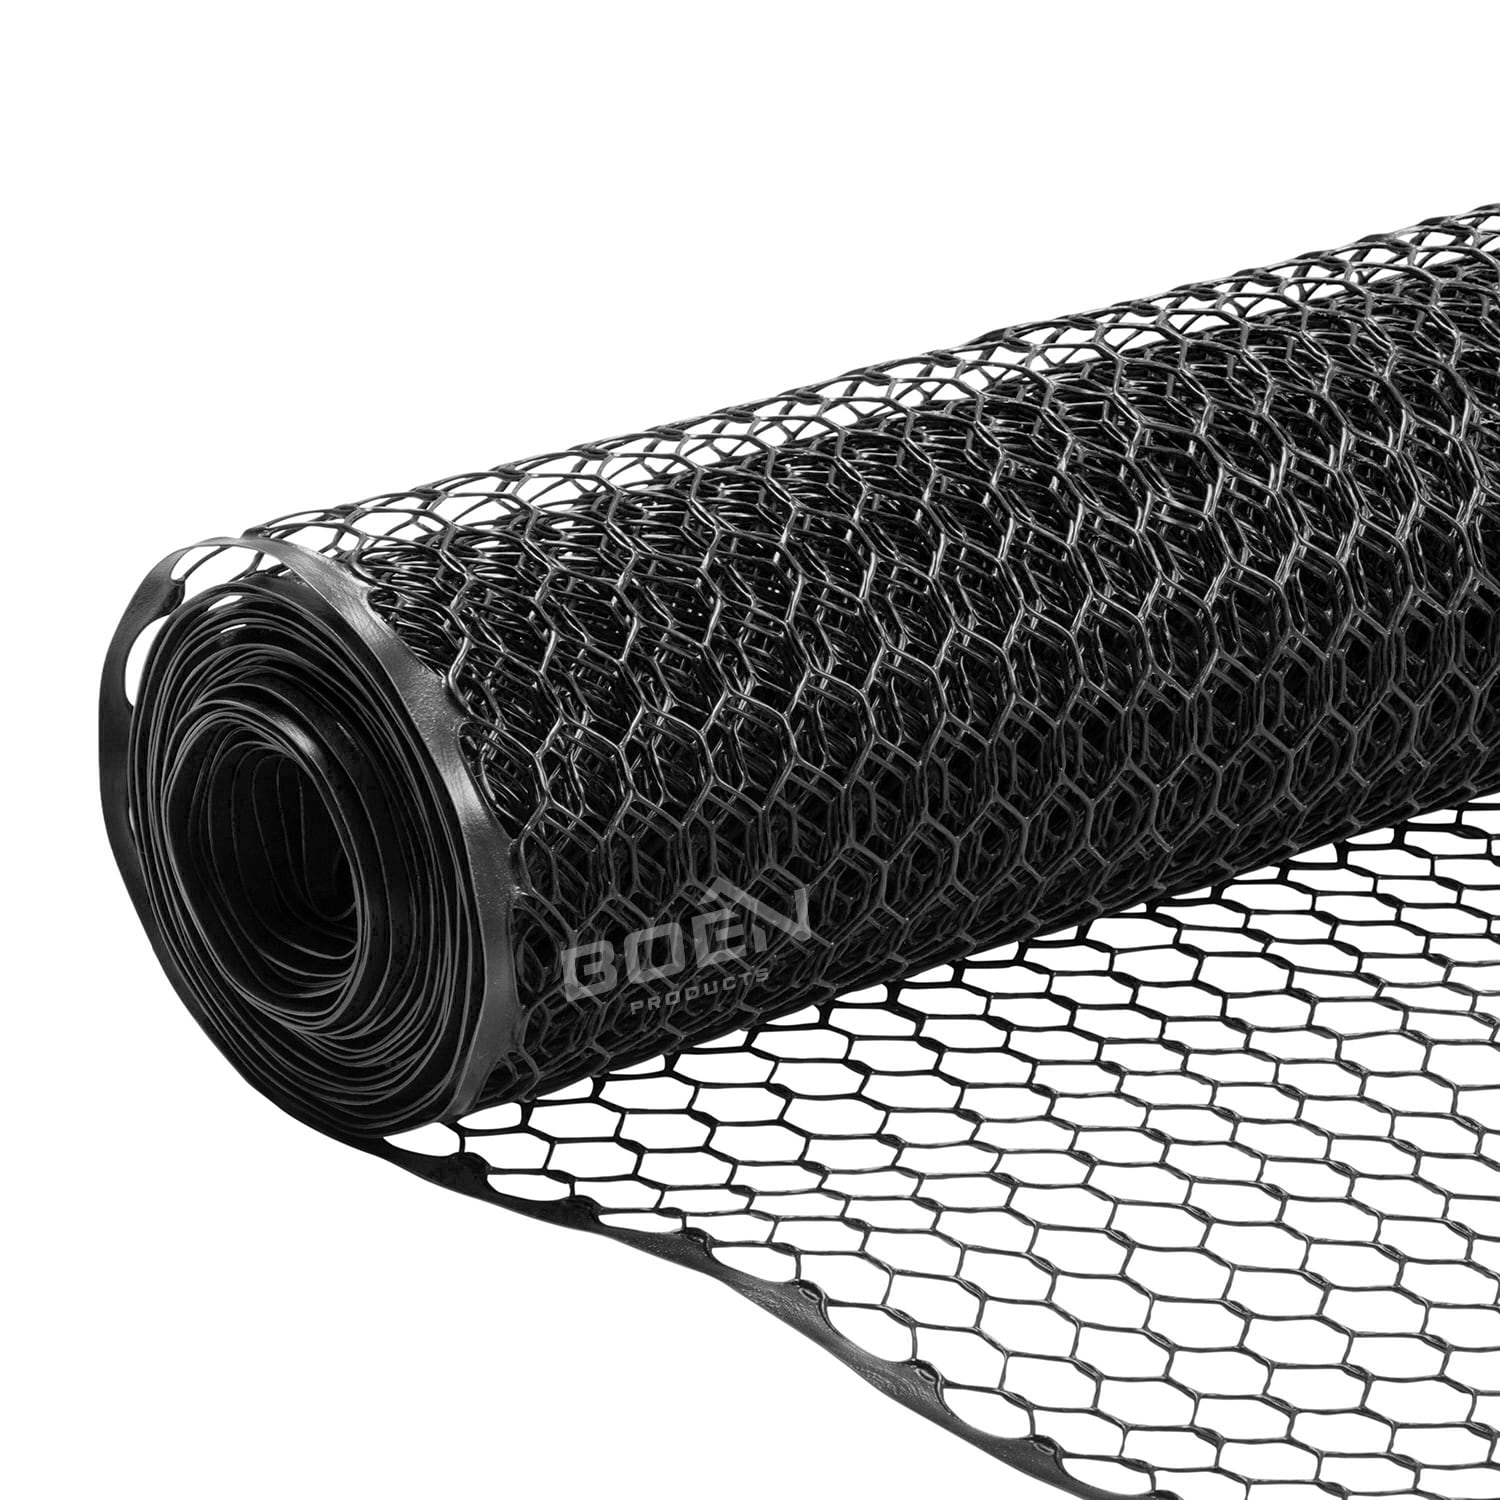 BOEN 25-ft x 3-ft 0-Gauge Black Hdpe Chicken Wire Rolled Fencing with Mesh  Size 1/2-in x 1-in in the Rolled Fencing department at